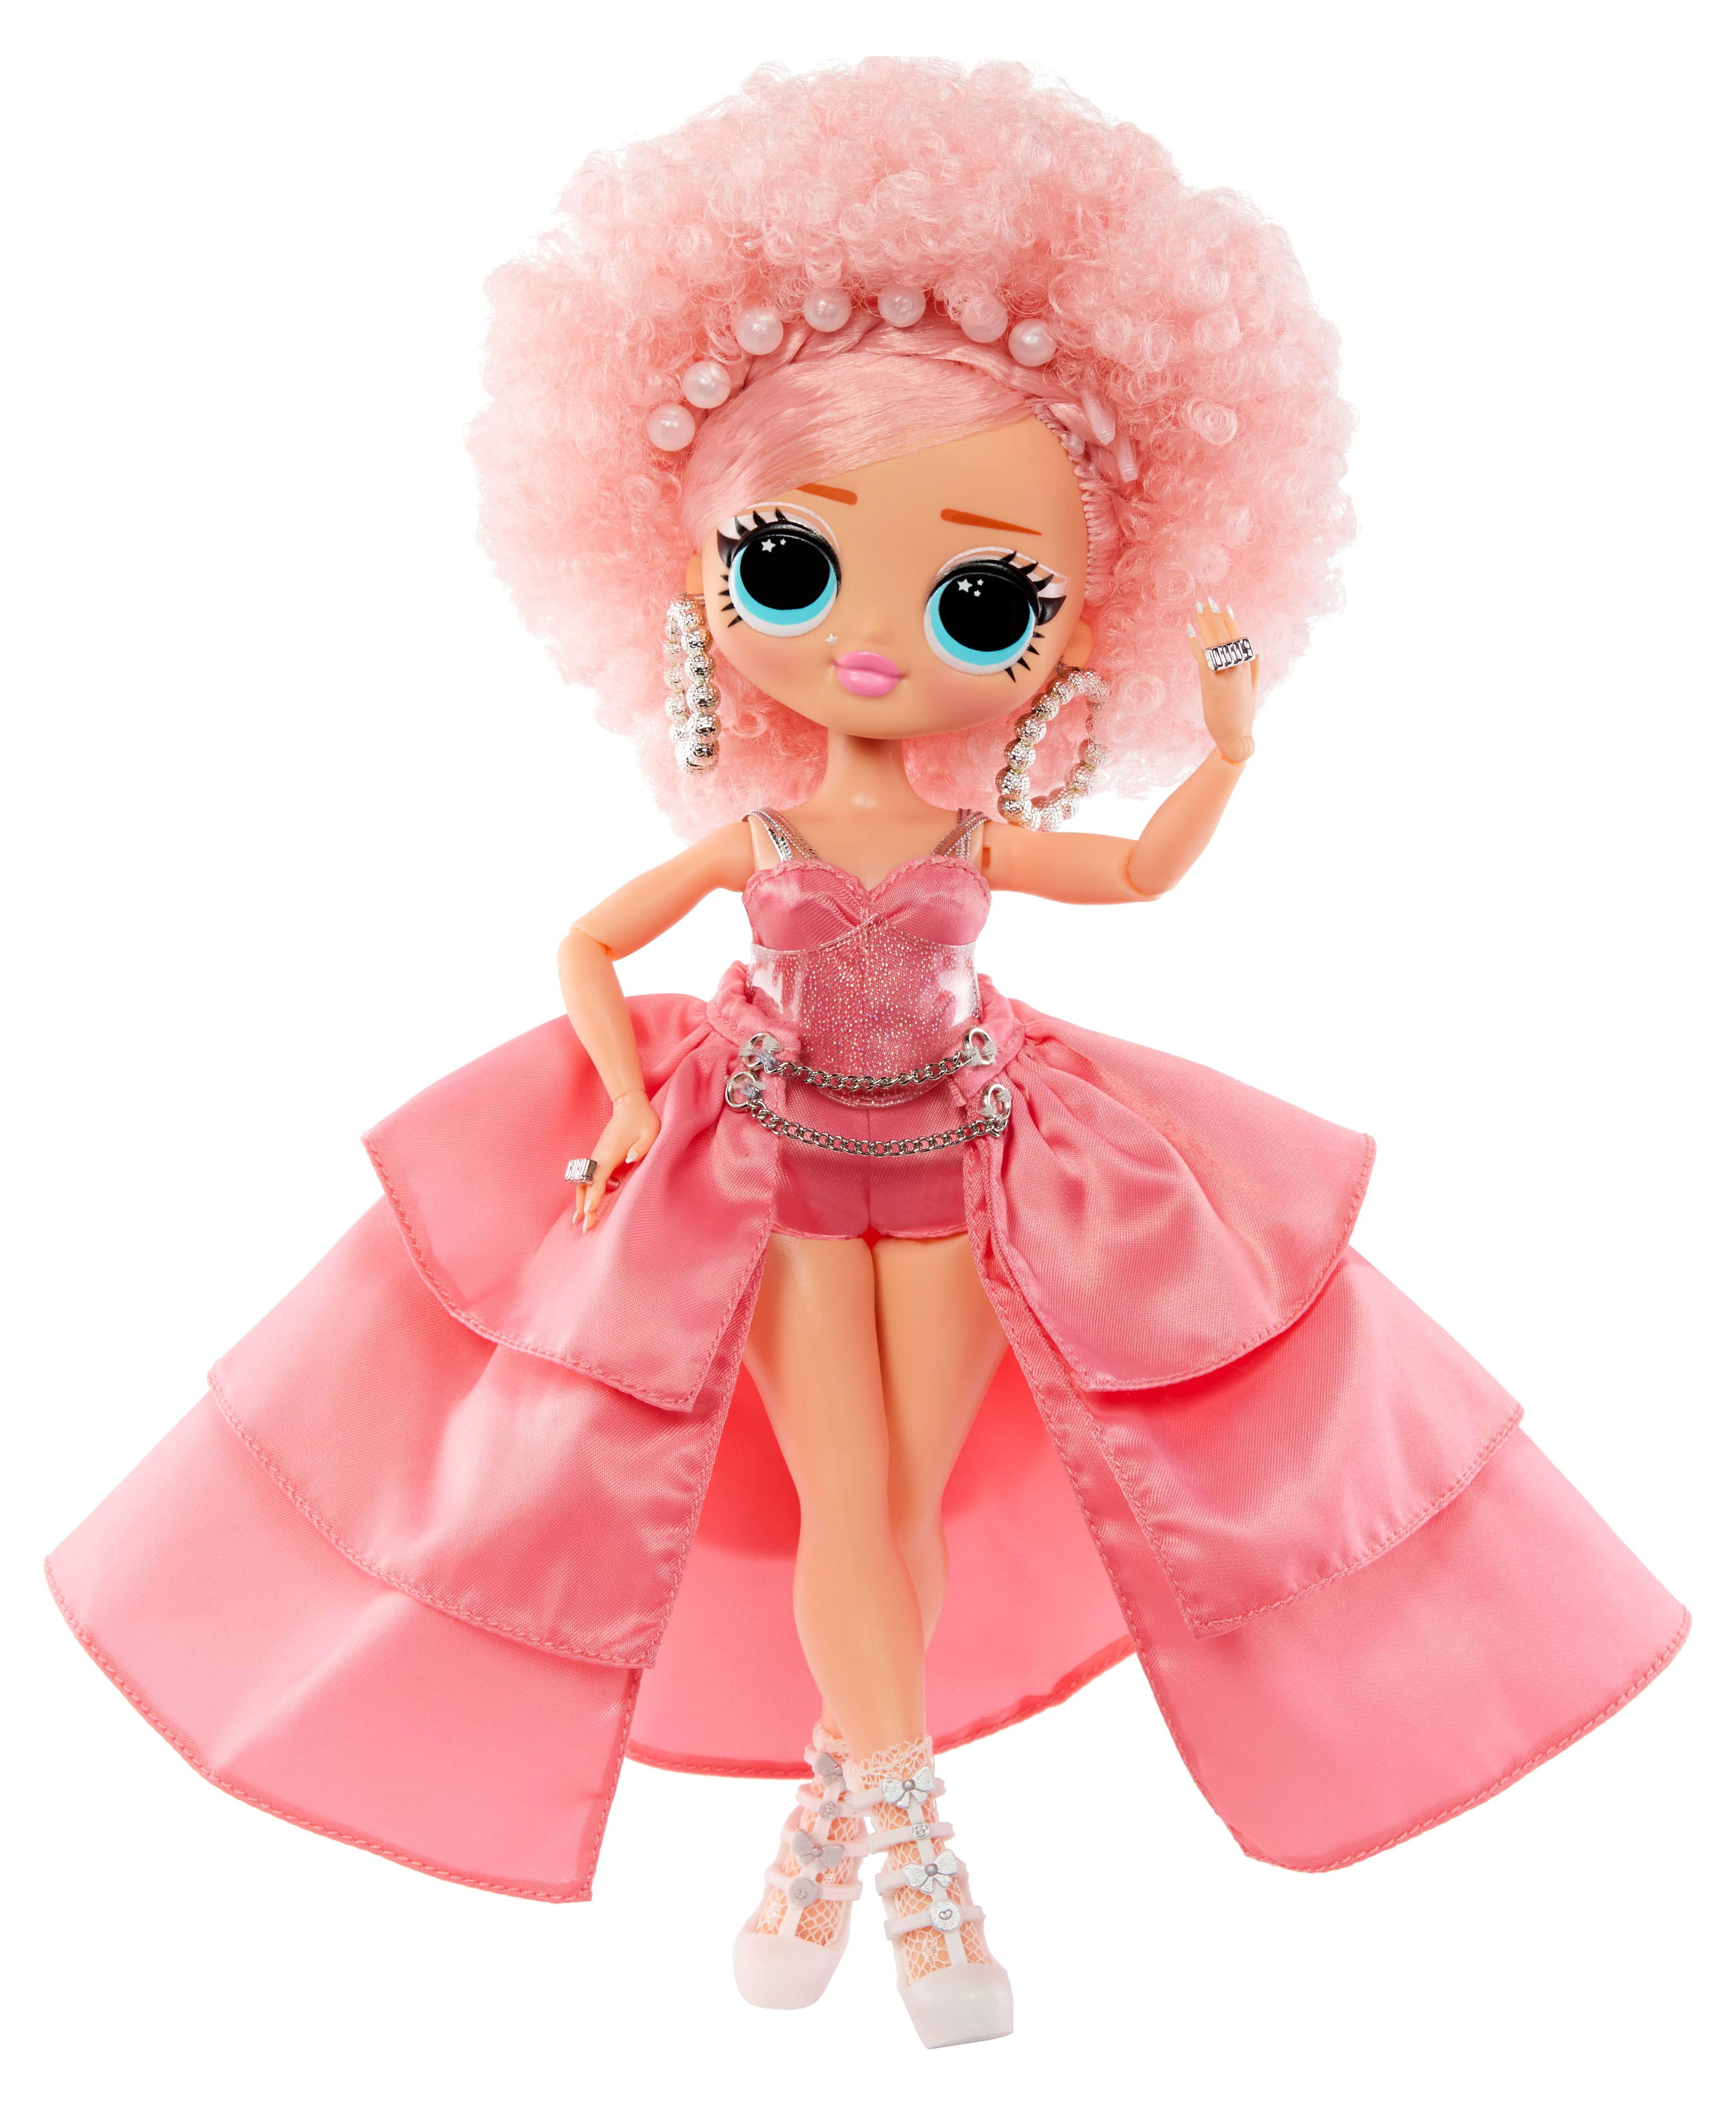 Lol Surprise OMG Present Surprise Fashion Doll Miss Glam with 20 Surprises